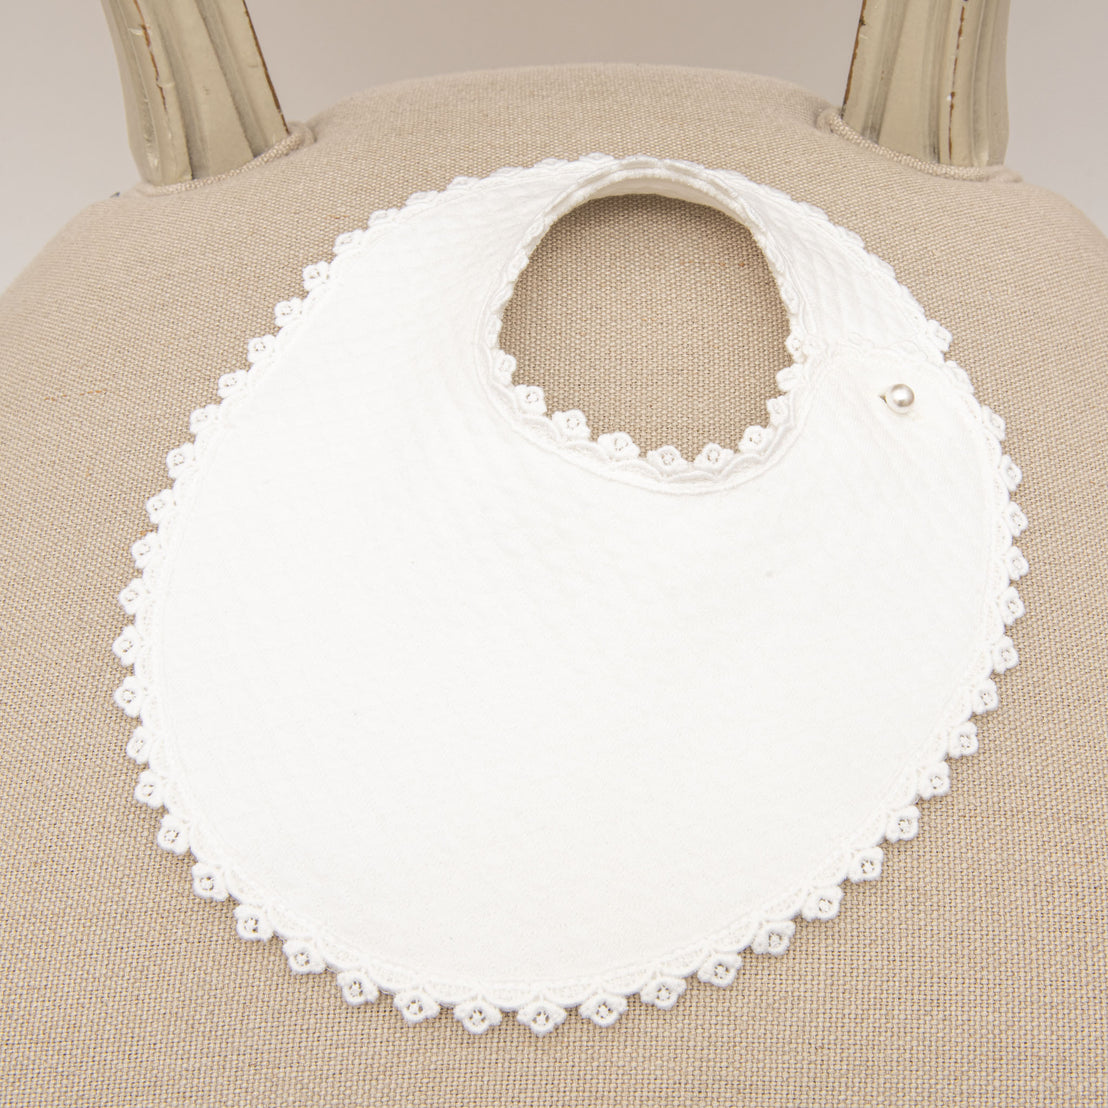 June Bib with a lace trim displayed on a chair, perfect as a baby shower gift. The bib has a rounded neckline and a single button closure on the side.